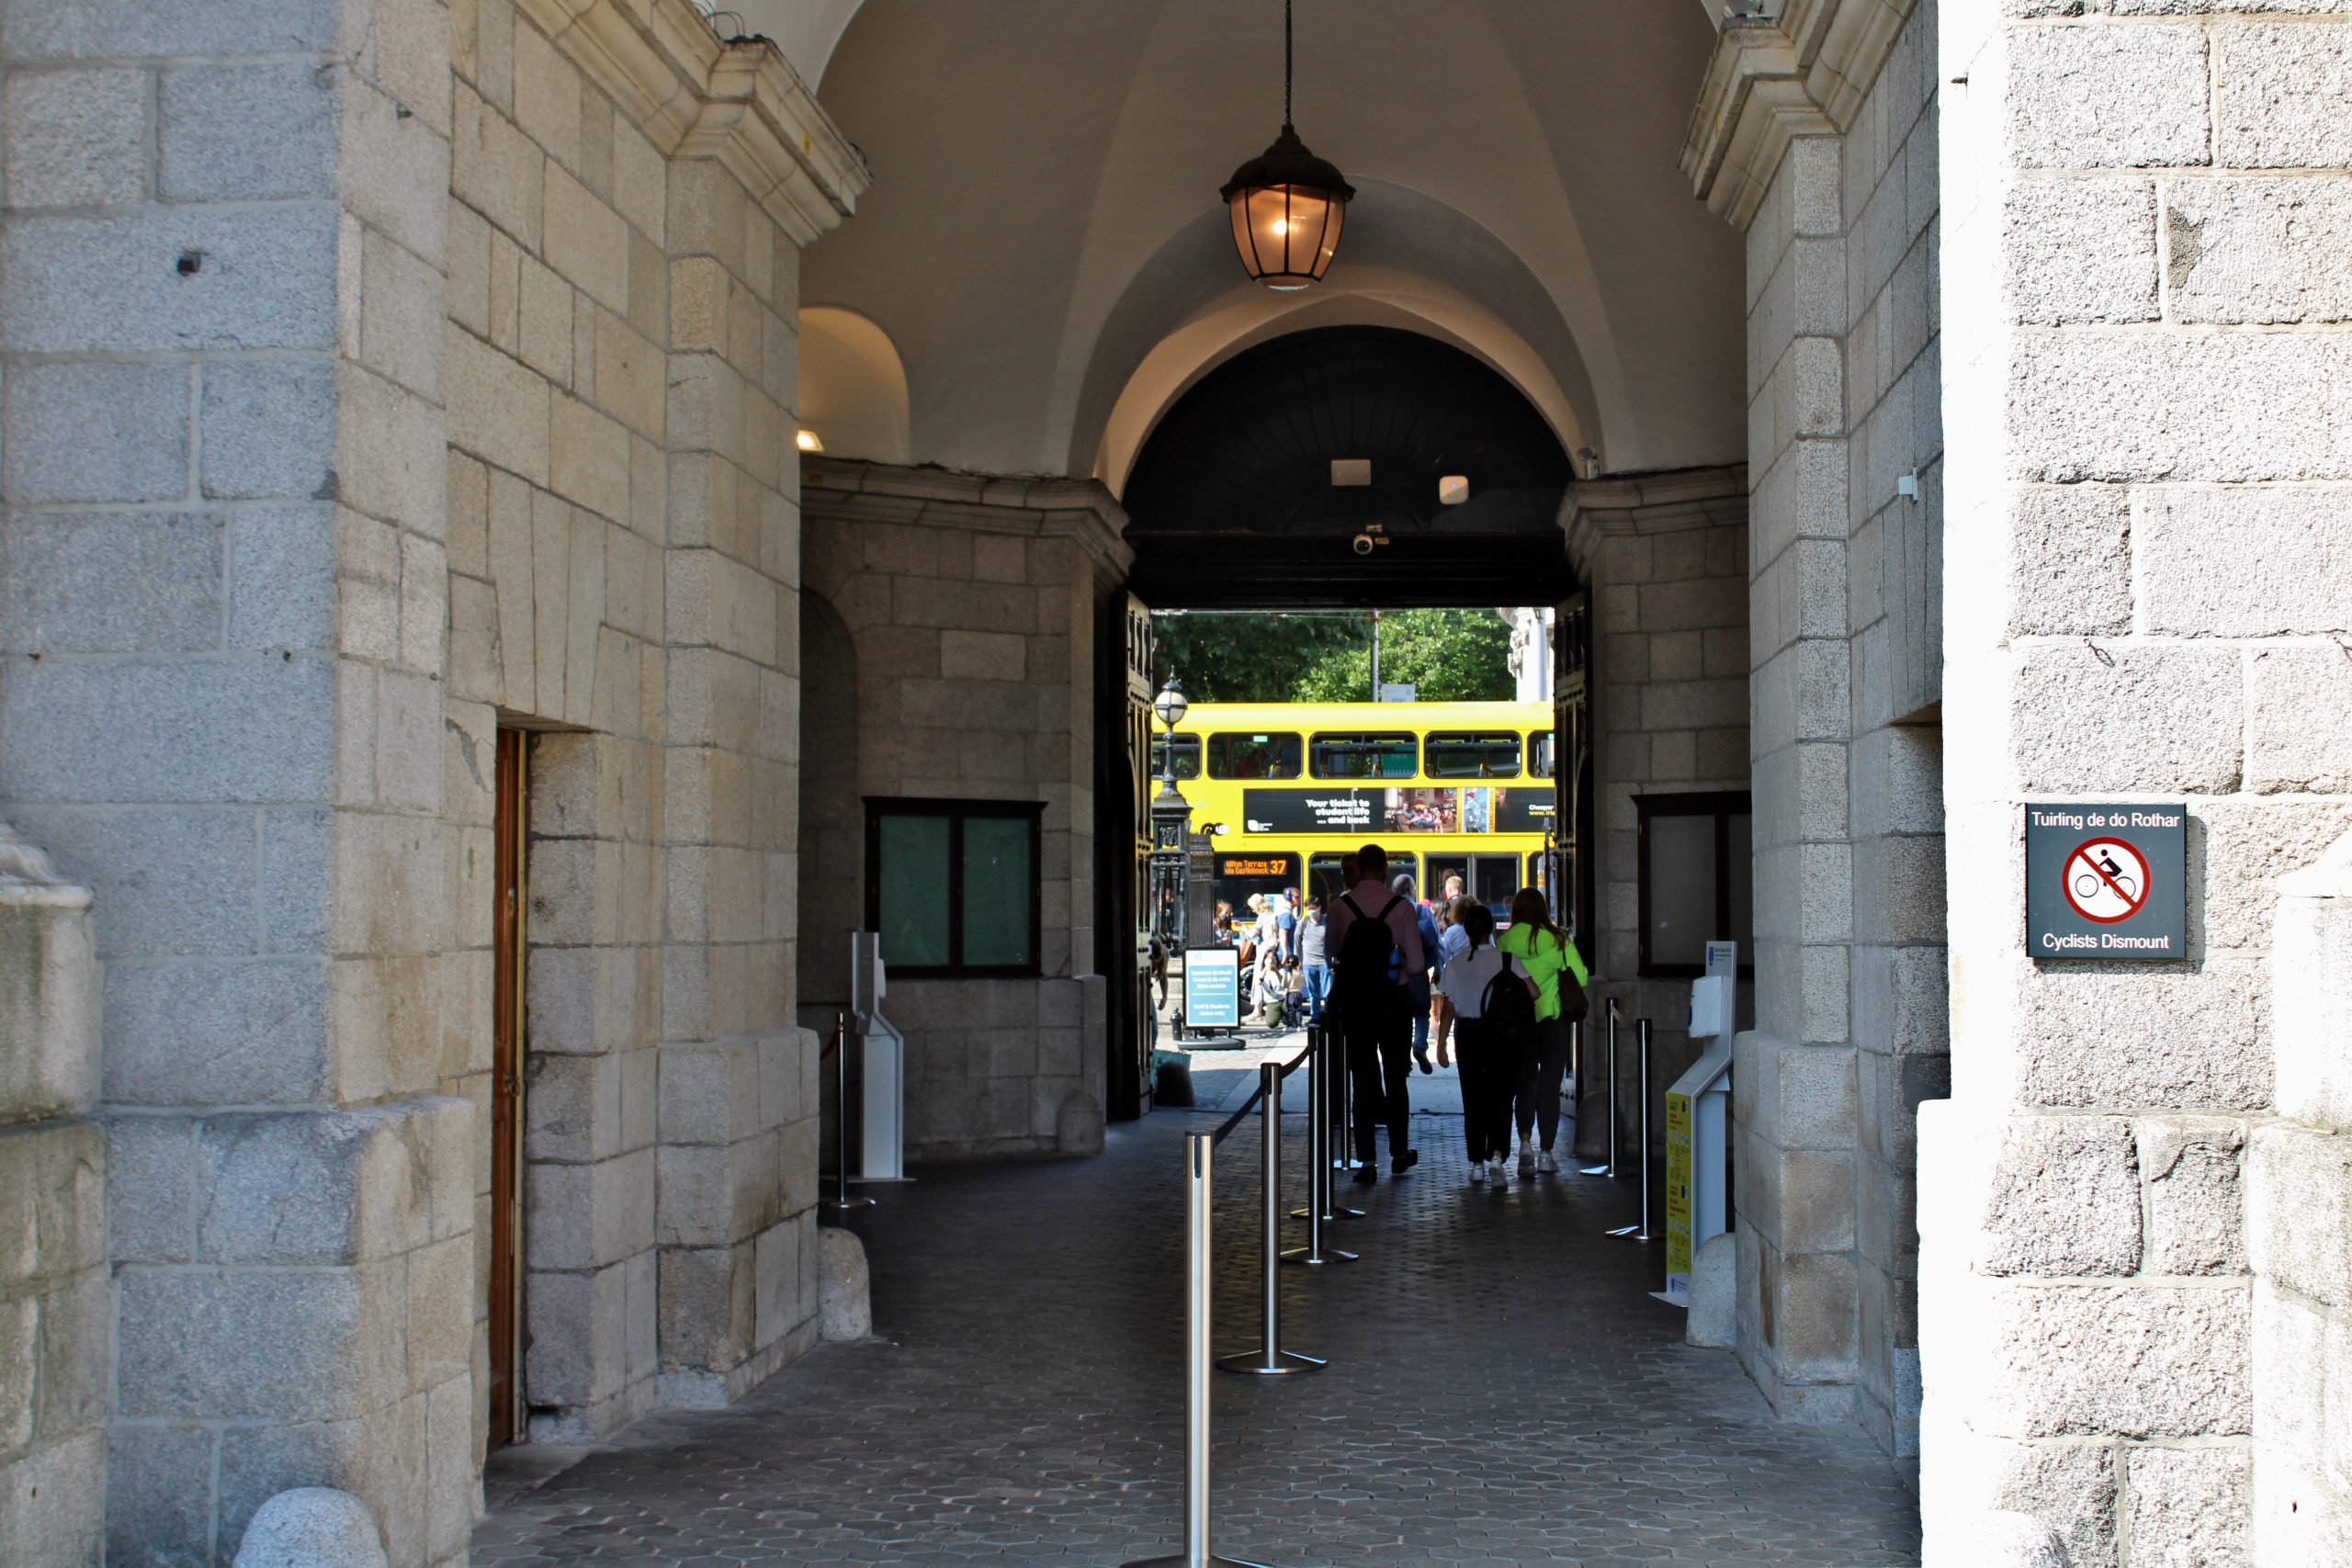 Trinity's Front Gate open during Senior Freshers' Week 2021.